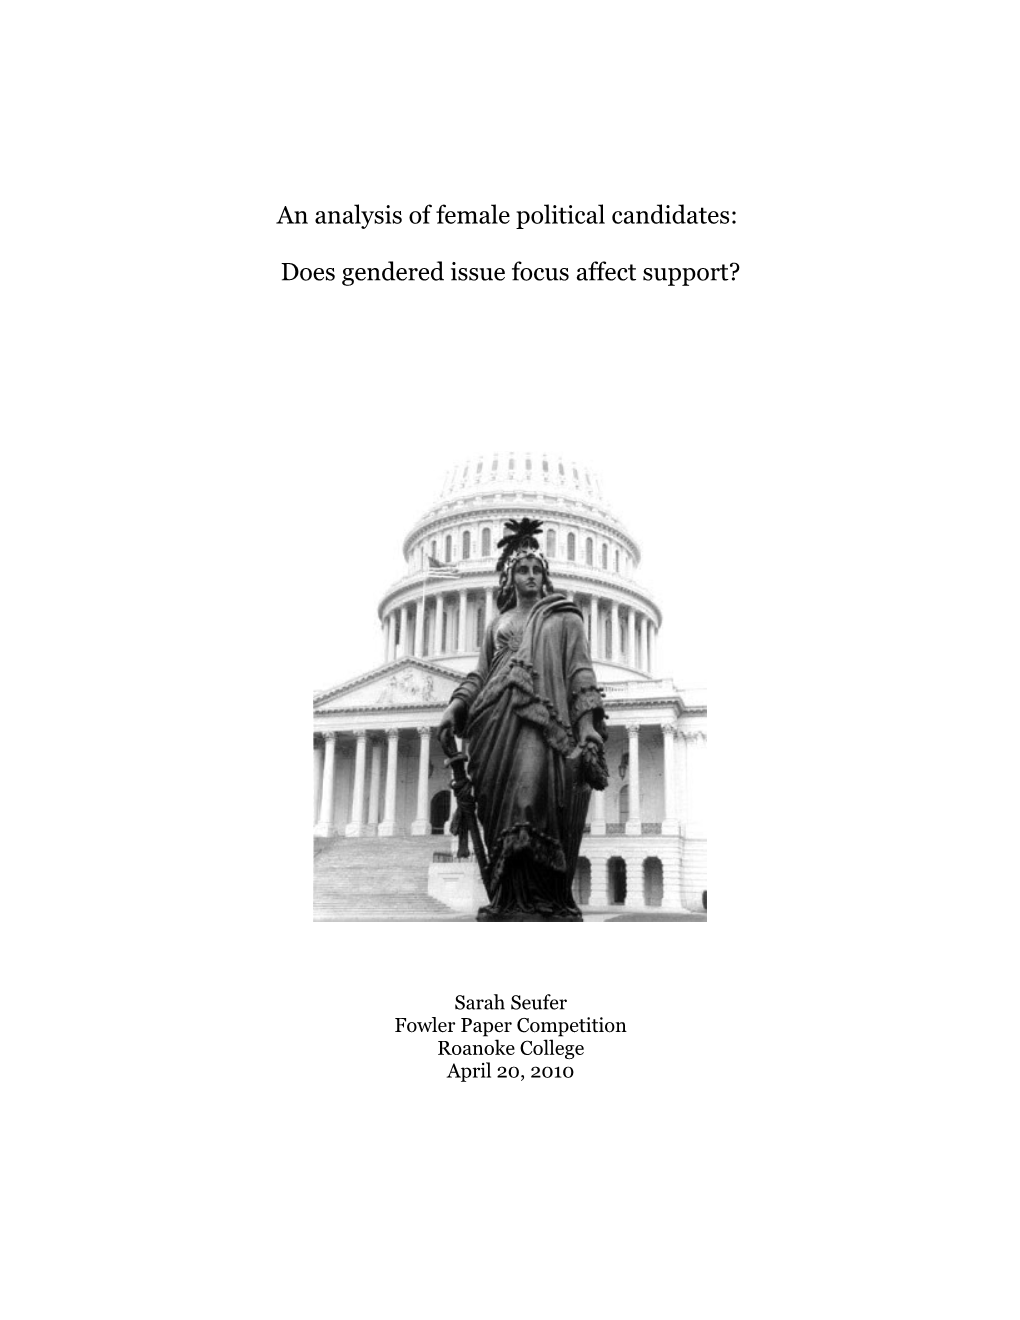 An Analysis of Female Political Candidates